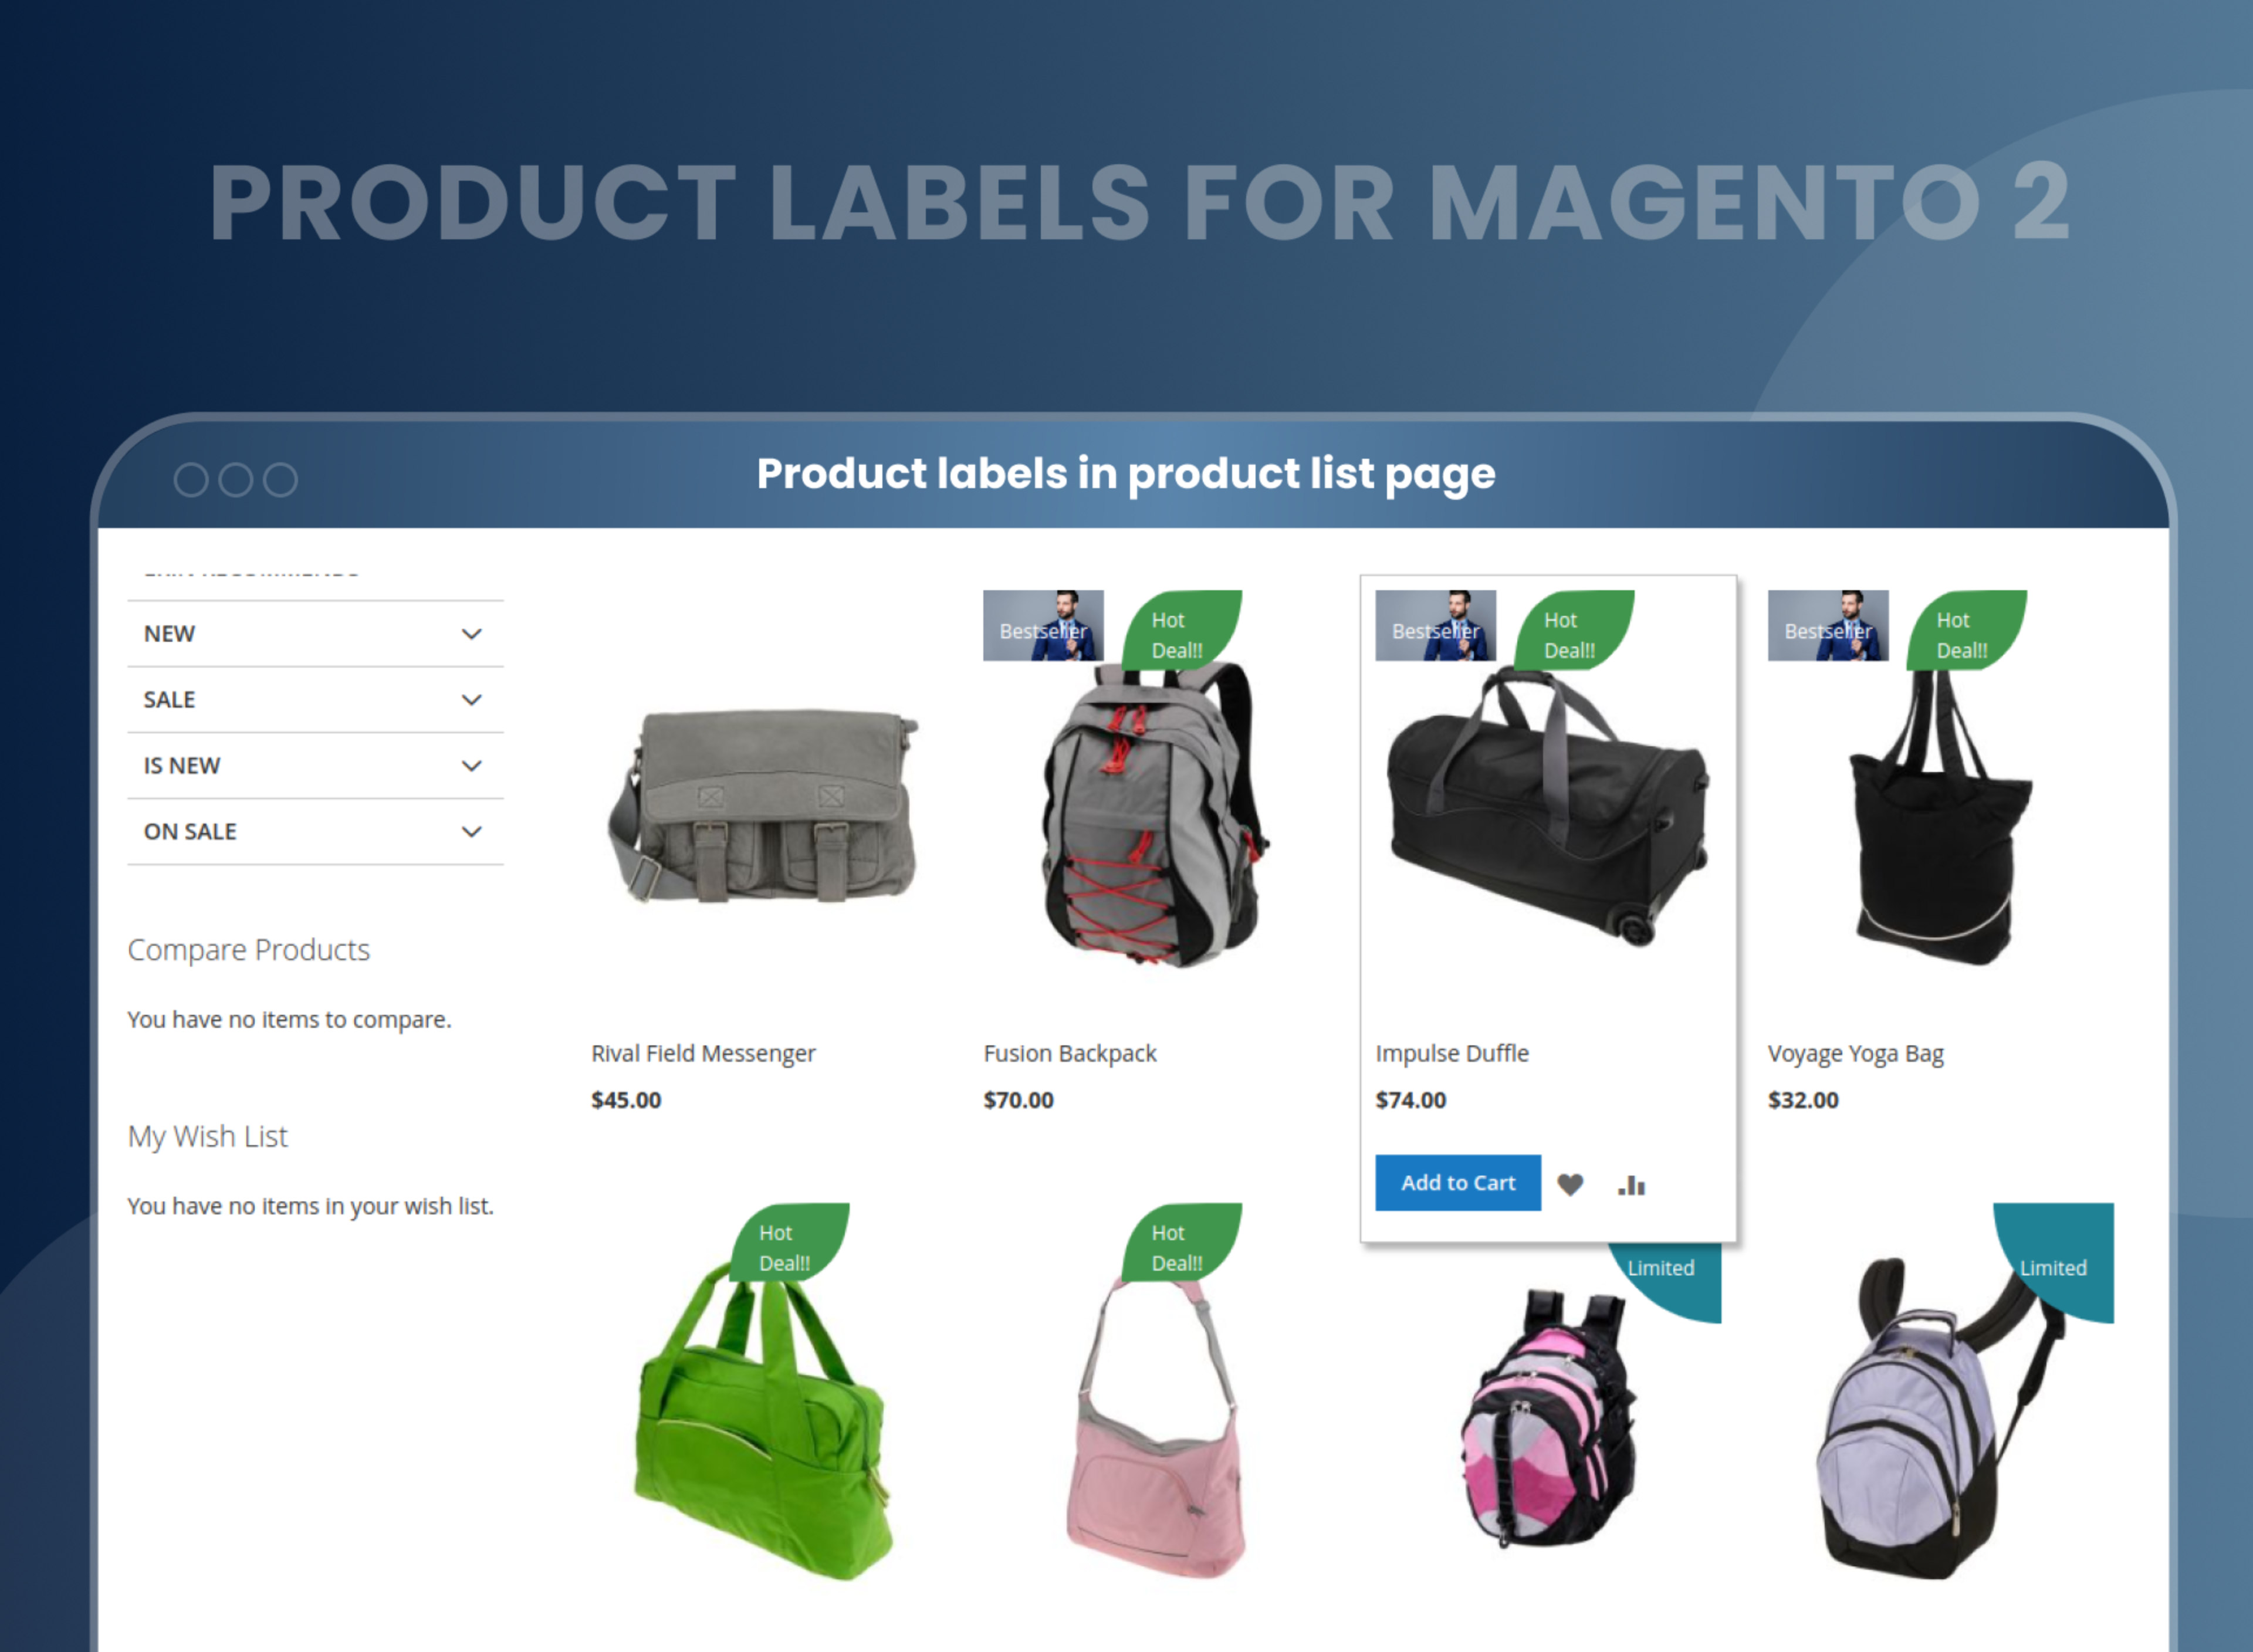 Product labels in product list page